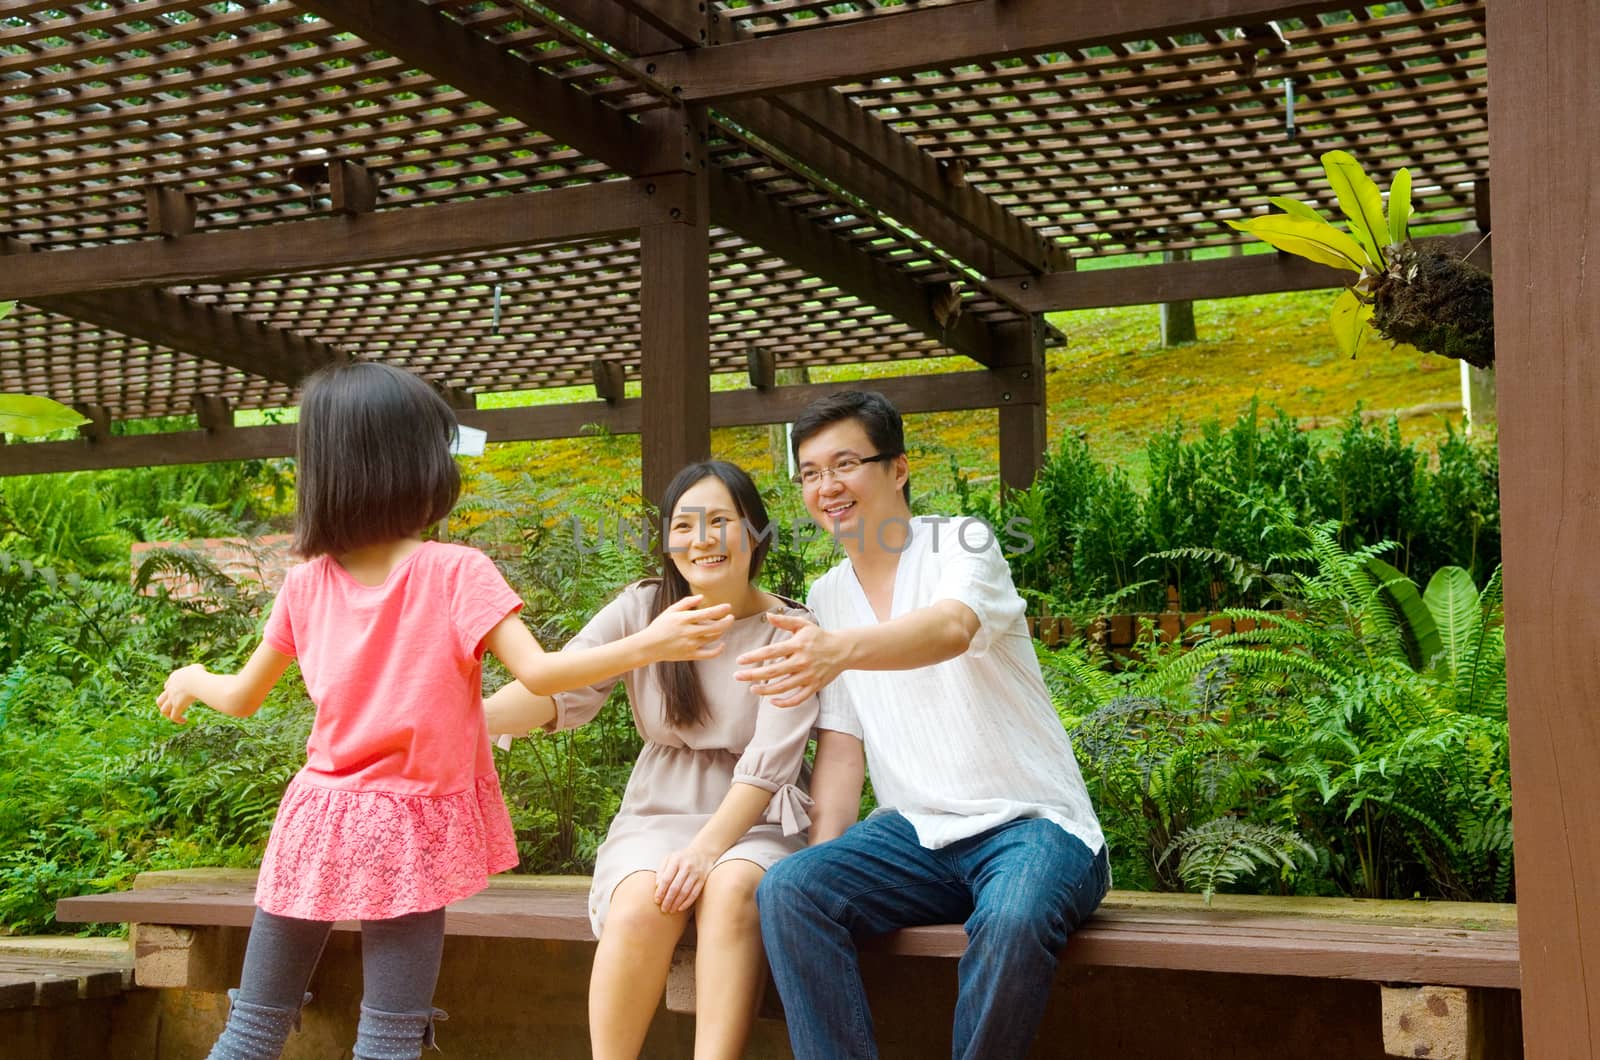 Happy Asian Family enjoying their time in the park